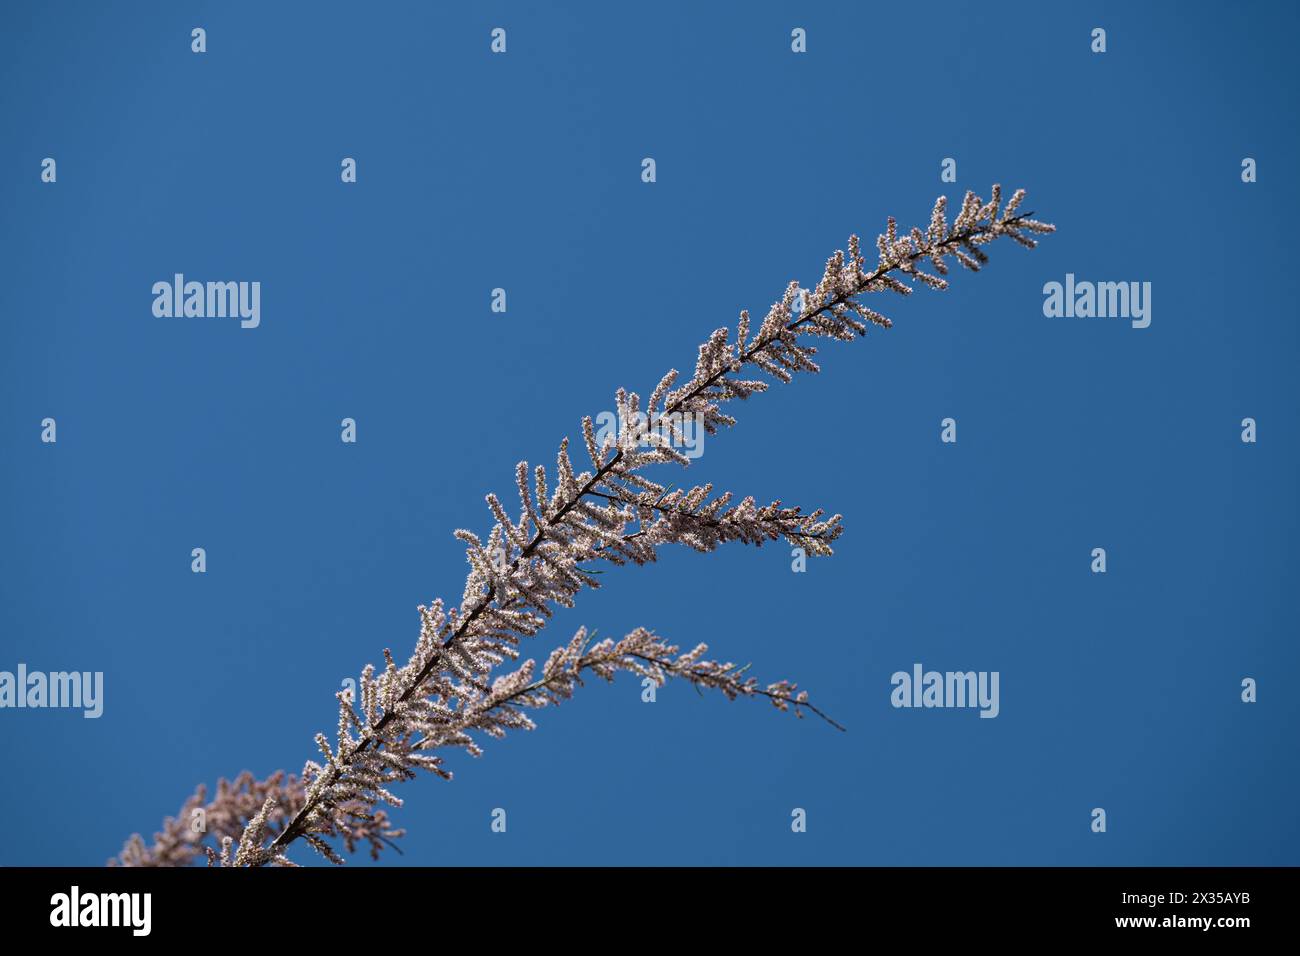 Blue sky background and branch of tamarisk plant of Tamaricaceae family. Stock Photo